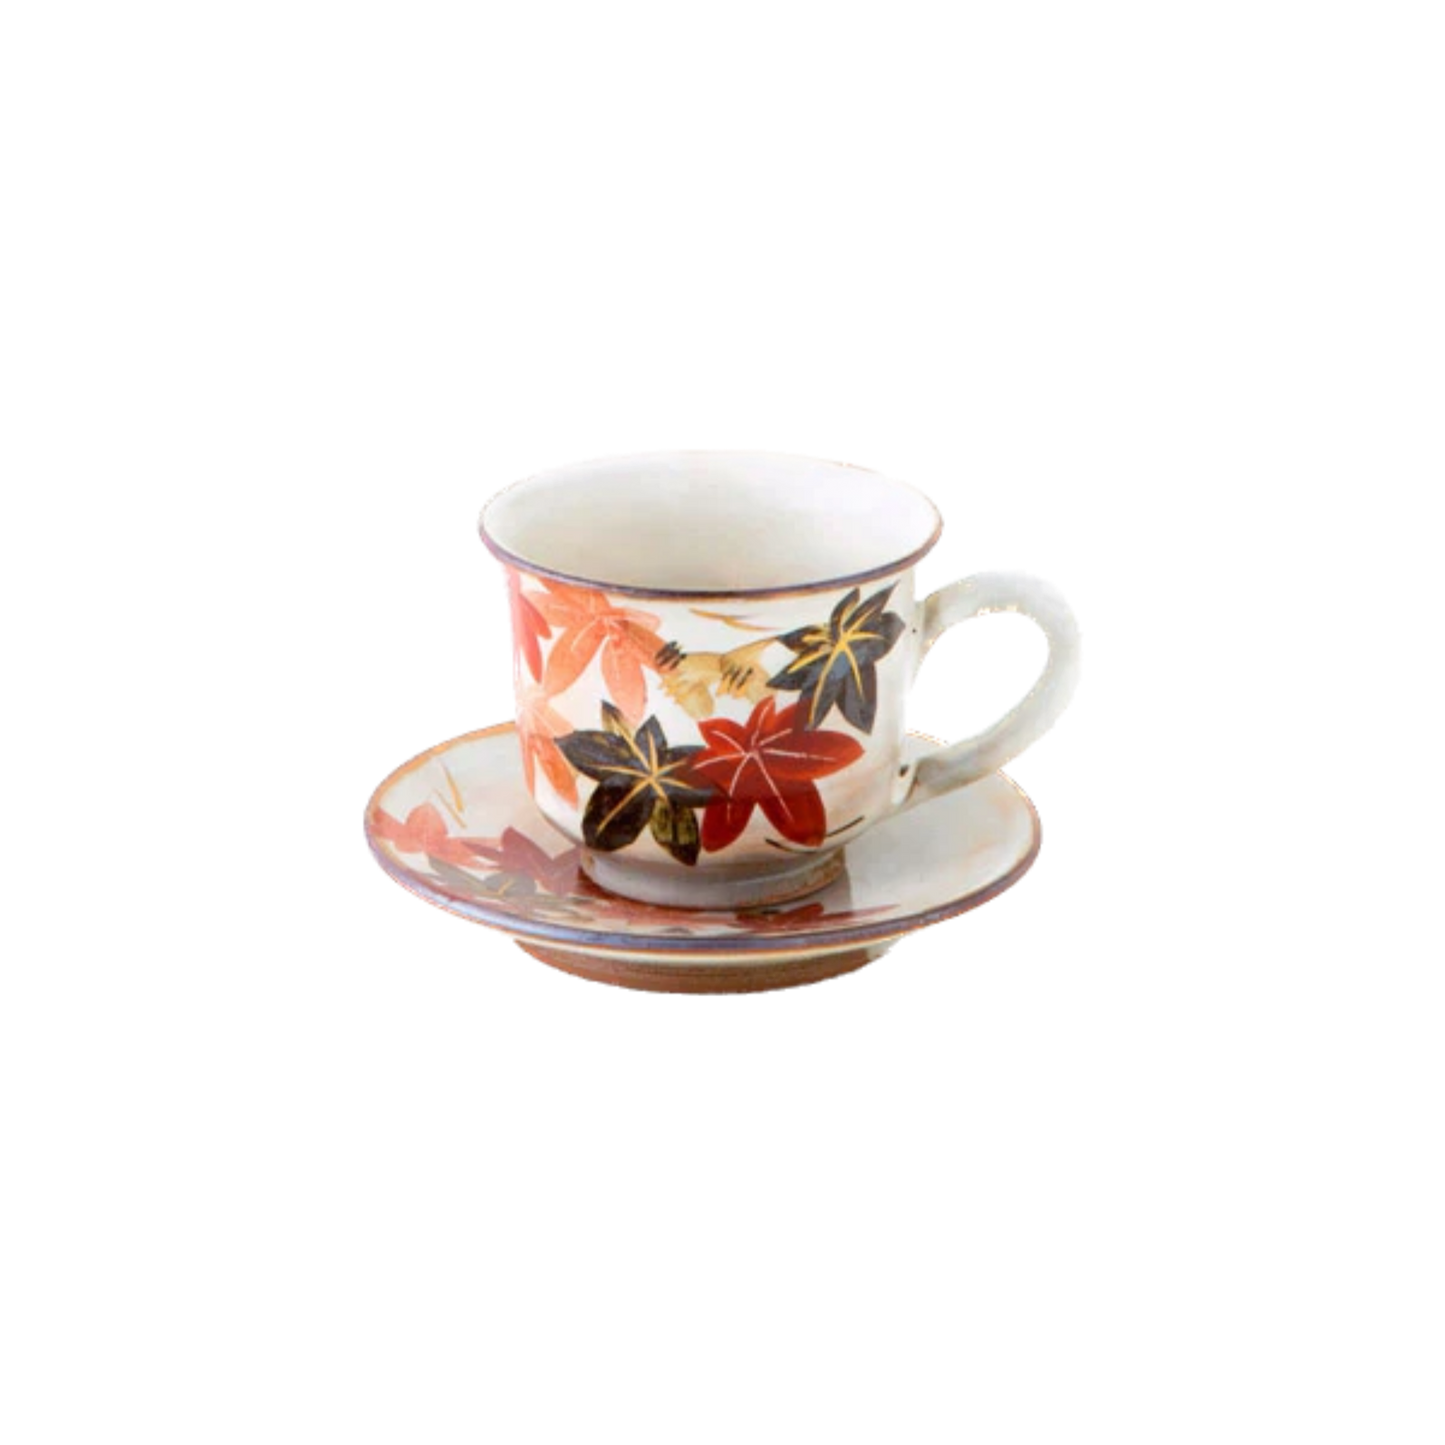 Cup & Saucer Set - Autumn leaves